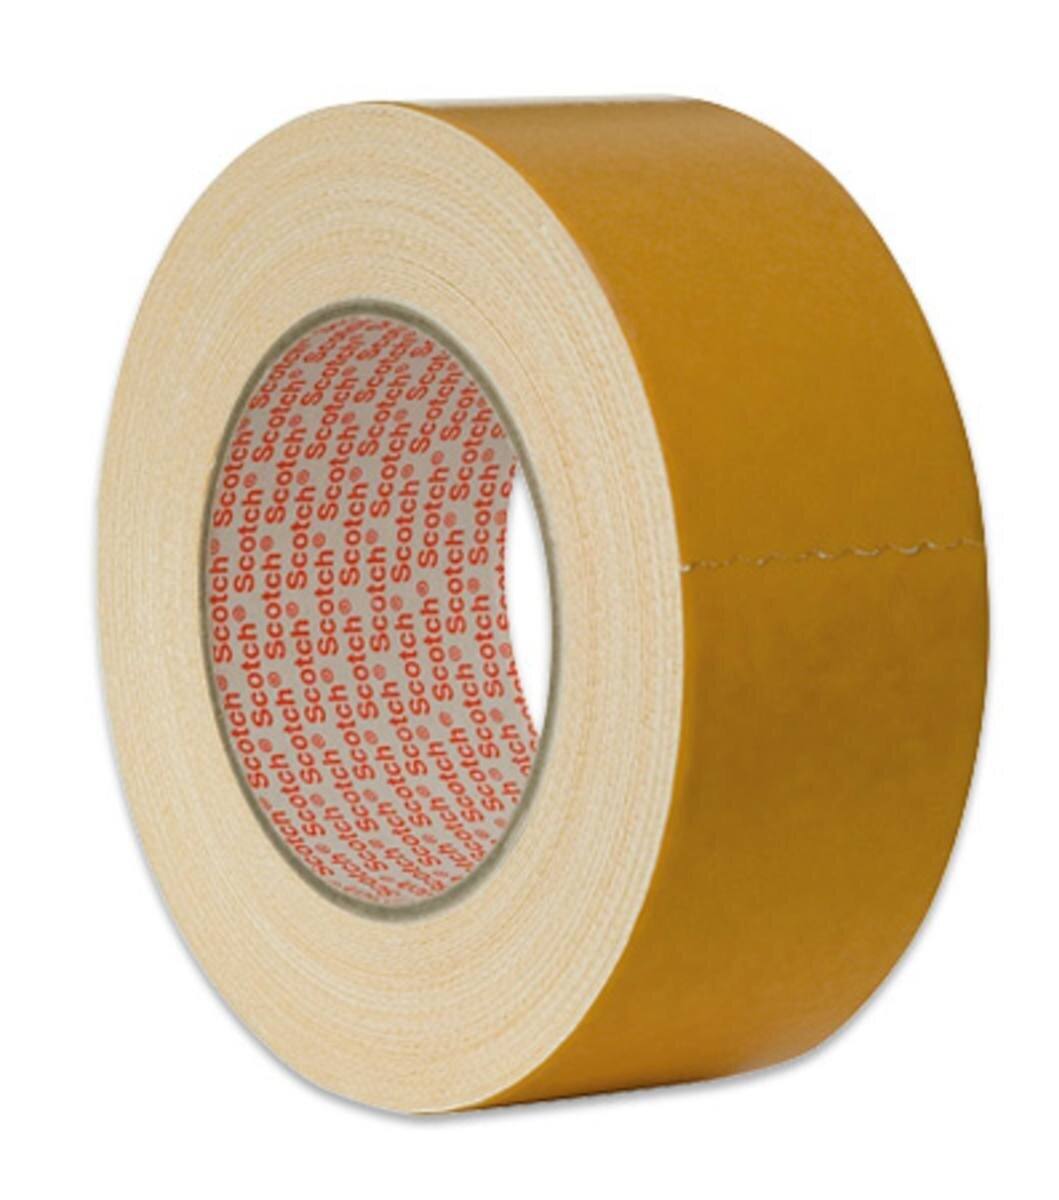 3M Double-sided adhesive tape with polypropylene backing 9195, yellow, 25 mm x 25 m, 0.13 mm